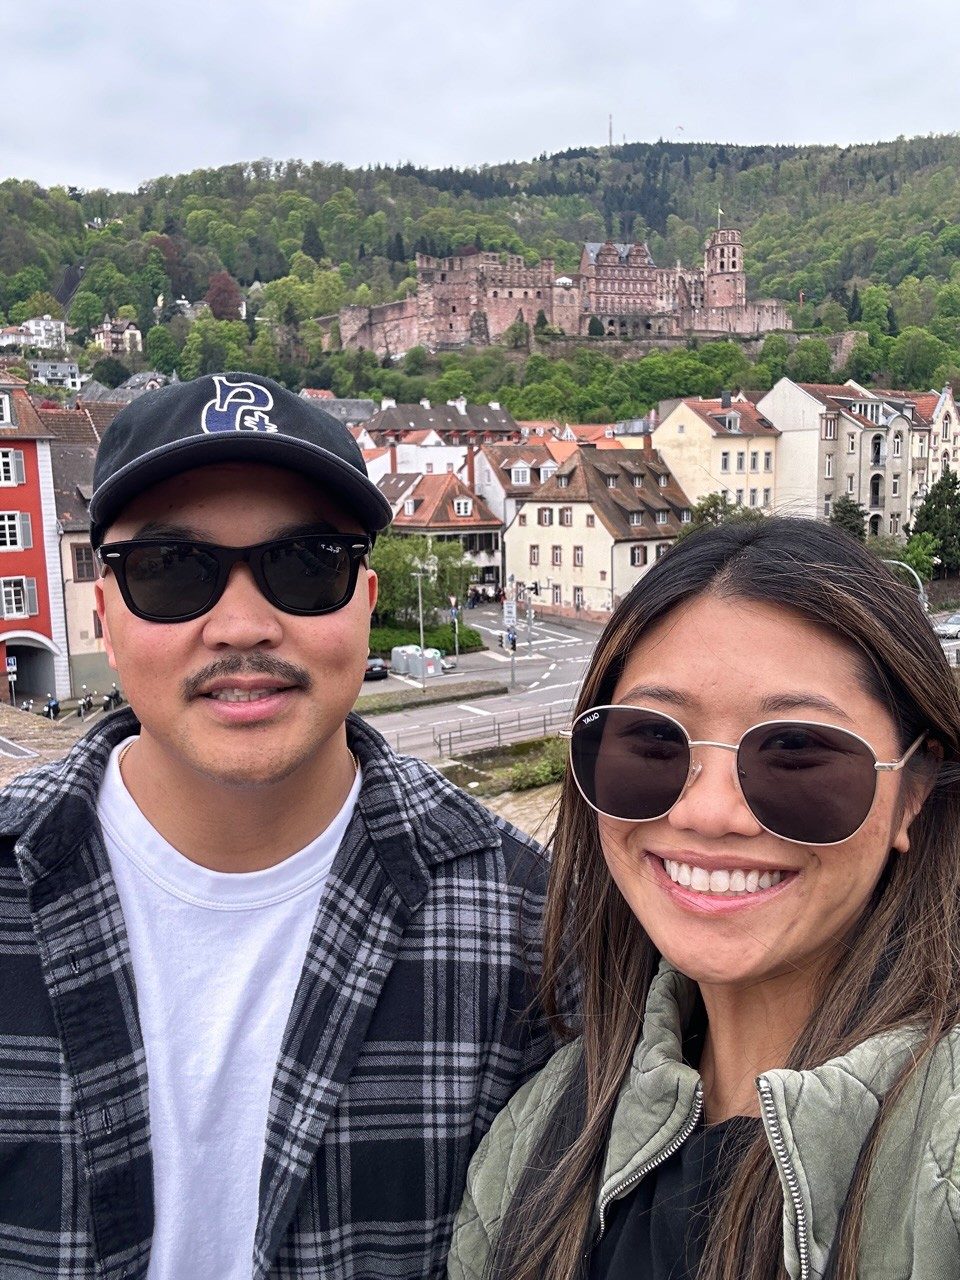 Maria and her husband in Germany